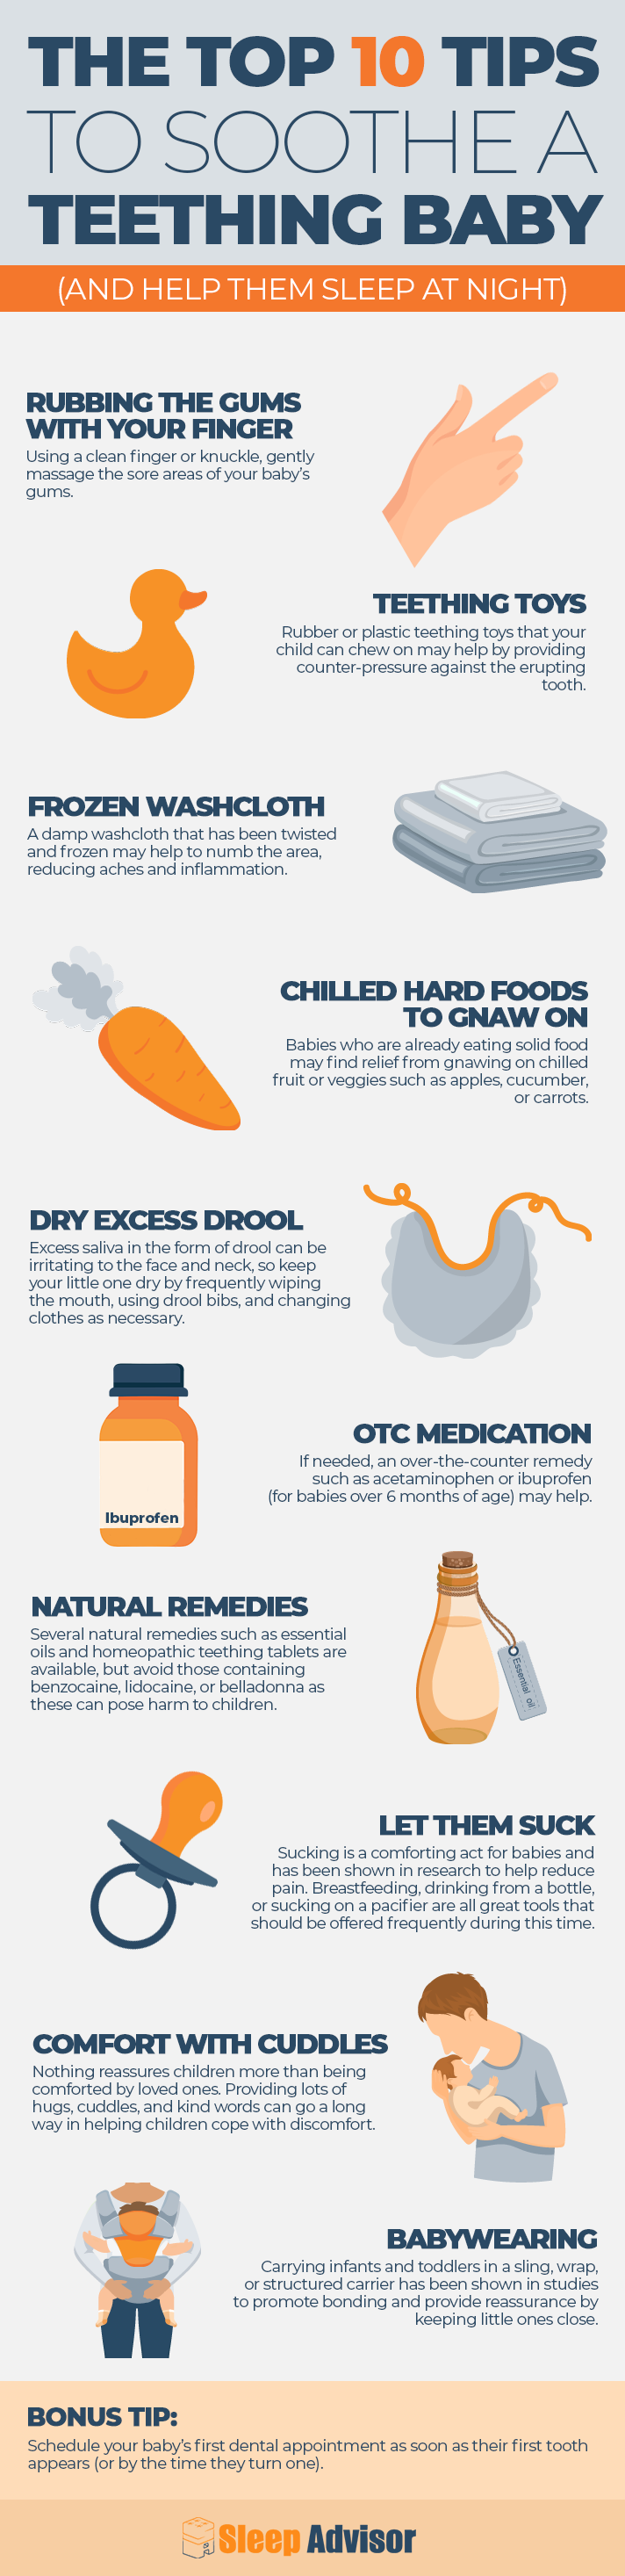 Tips To Soothe a Teething Baby Infographic